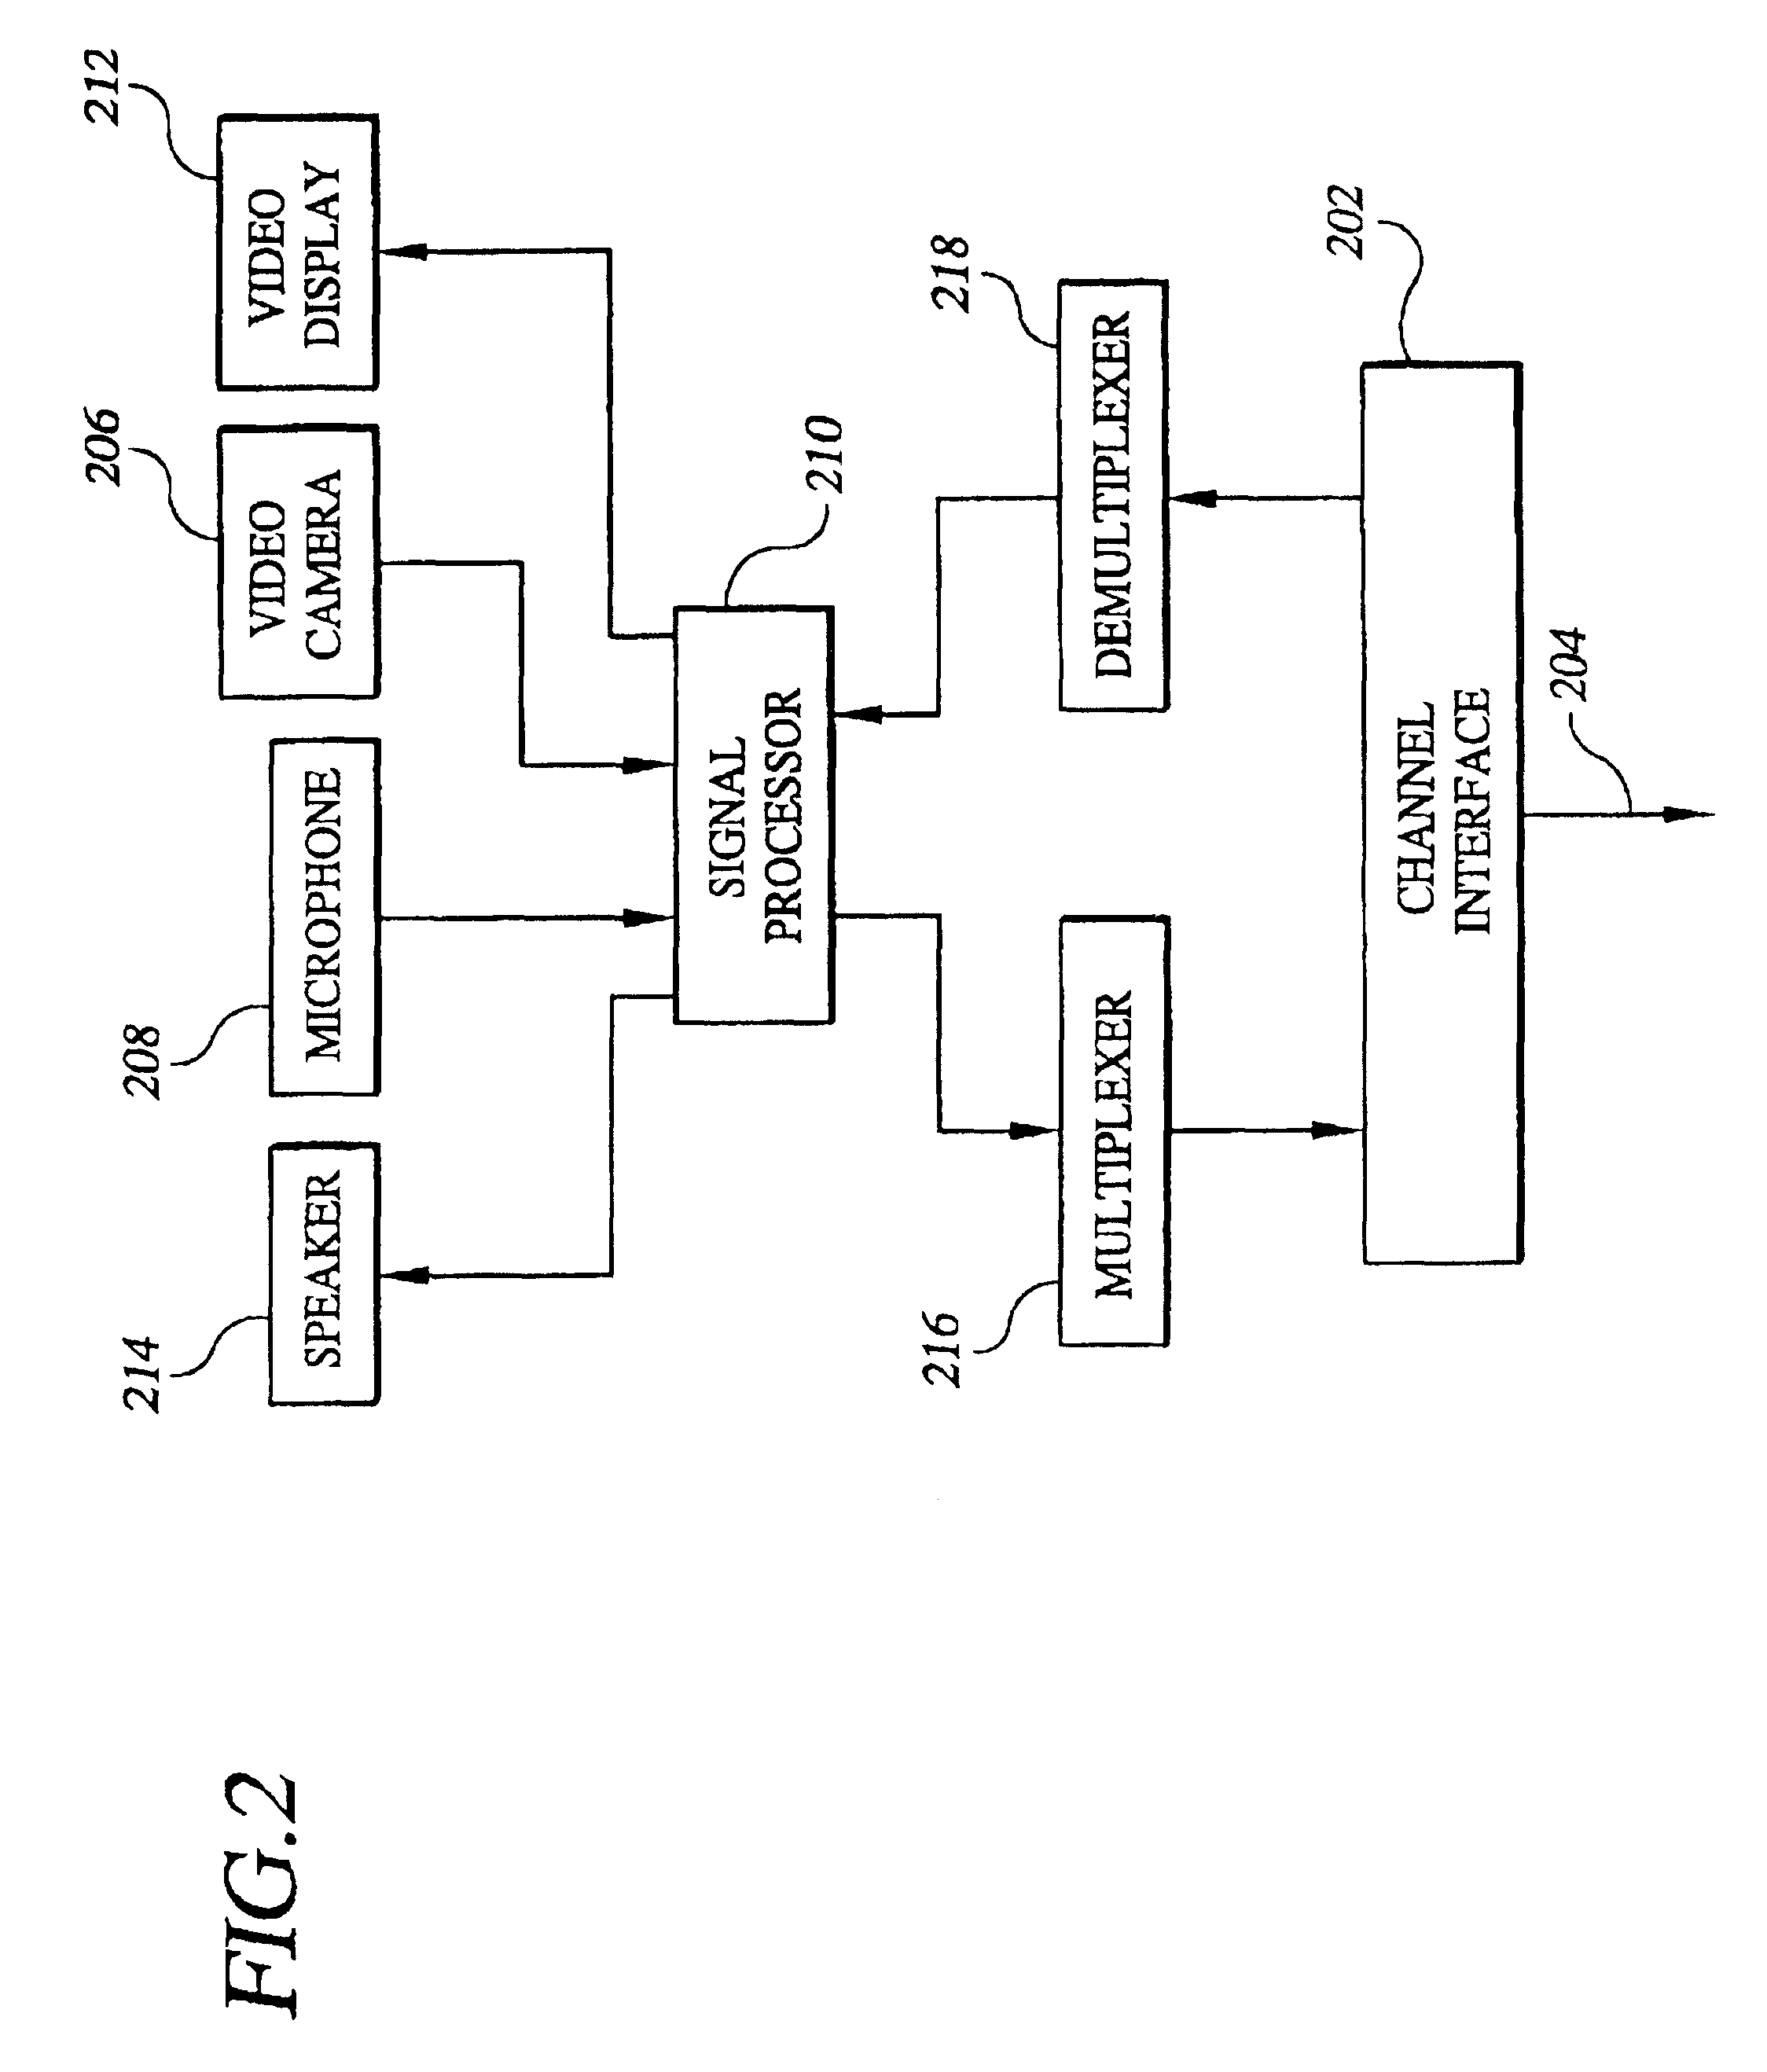 Video-assisted audio signal processing system and method